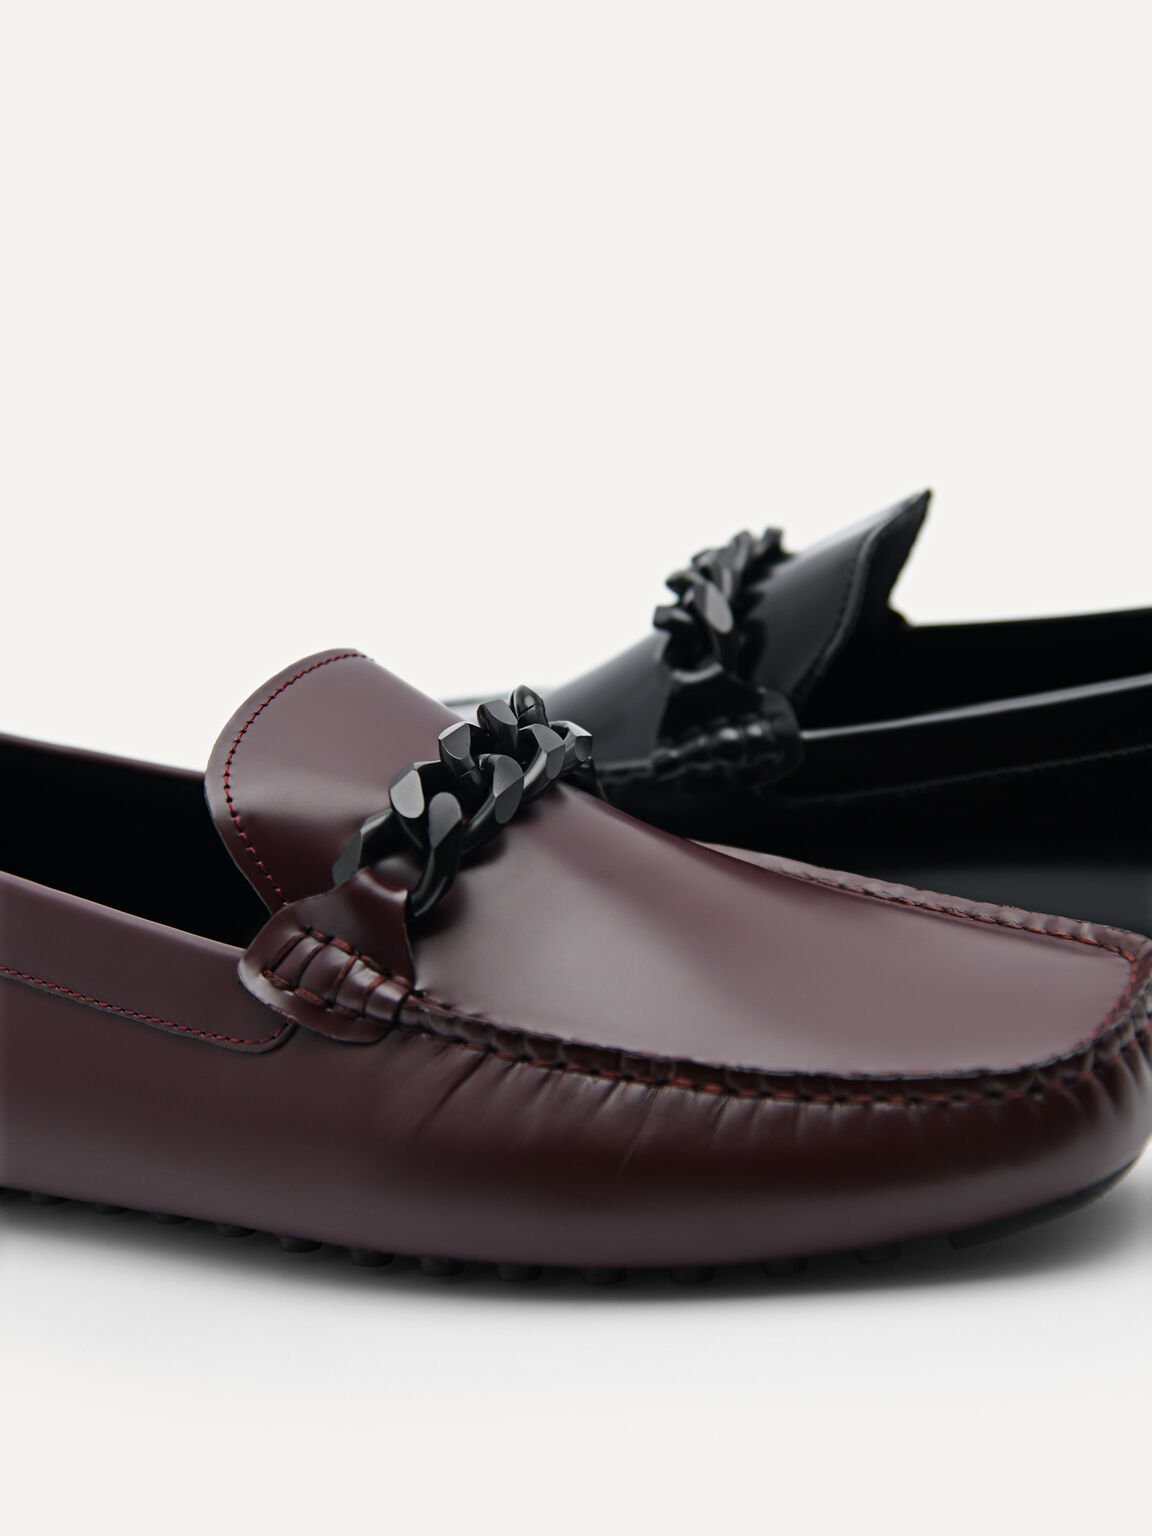 Leather Driving Moccassins with Curb Chain Saddle, Maroon